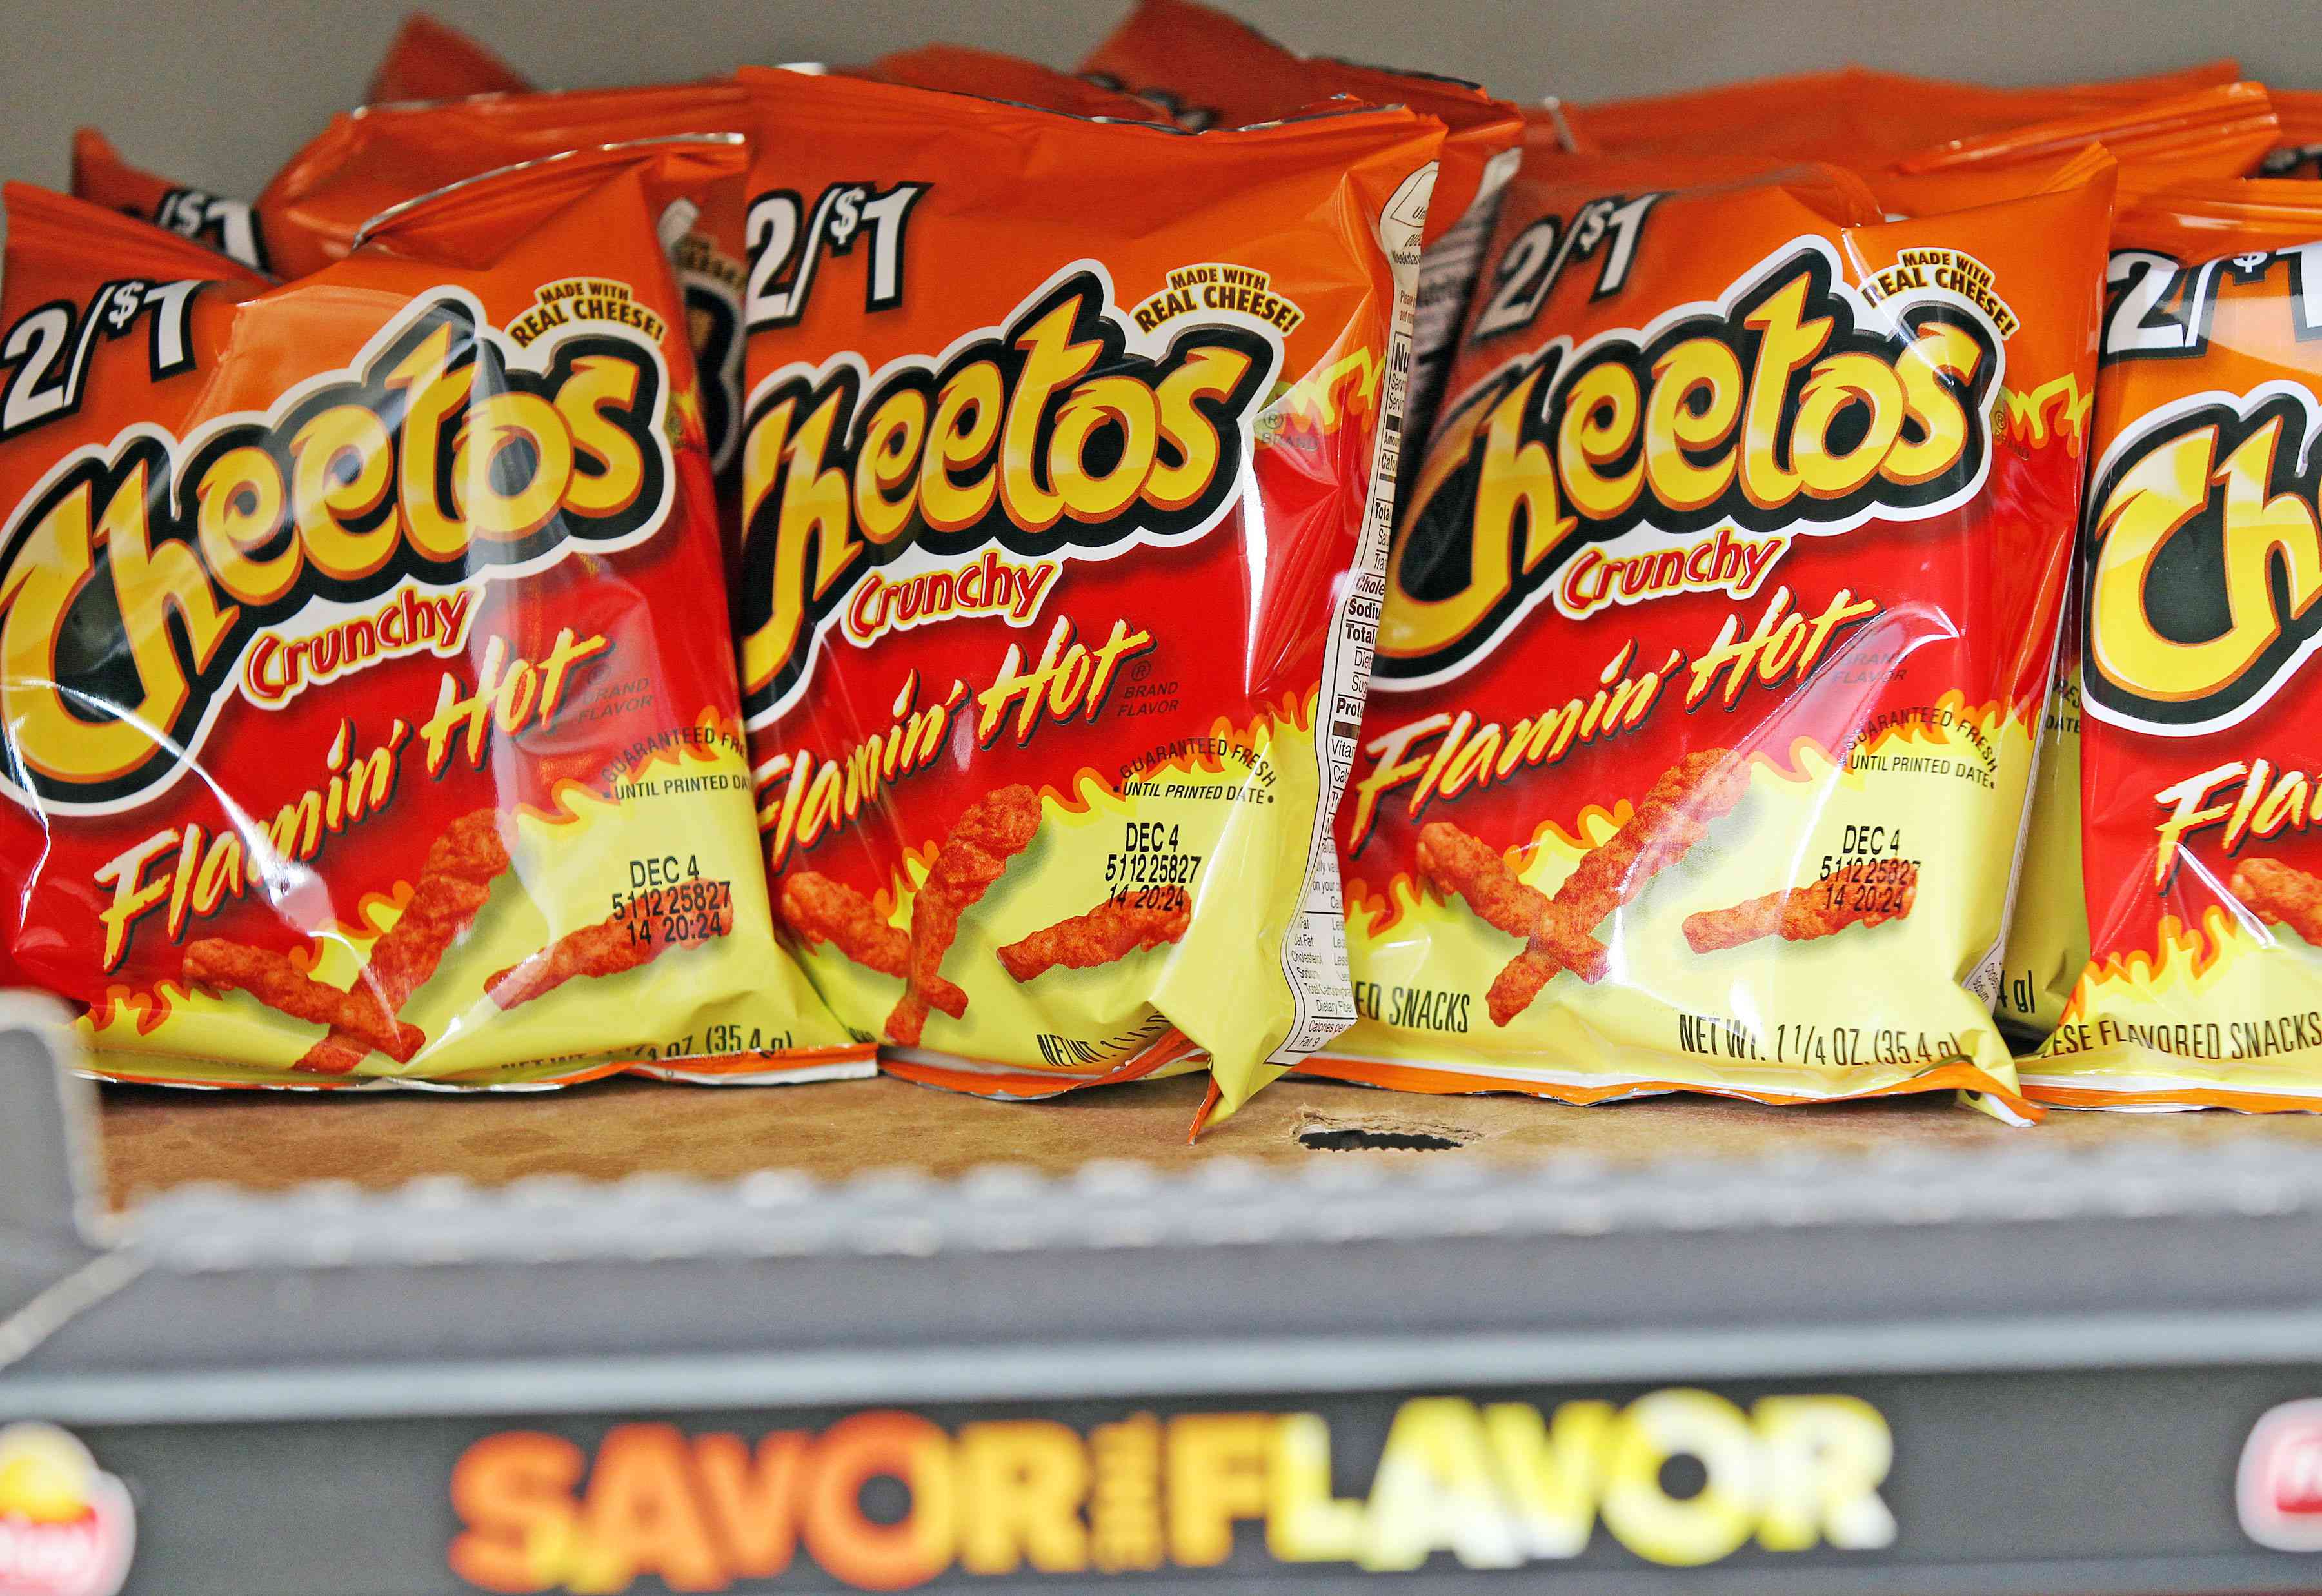 Bags of Cheetos Flamin' Hot Crunchy are displayed for sale at Touchdown Food Mart, September 27, 2012, in Chicago, Illinois. (John J. Kim/Chicago Tribune/Tribune News Service via Getty Images)